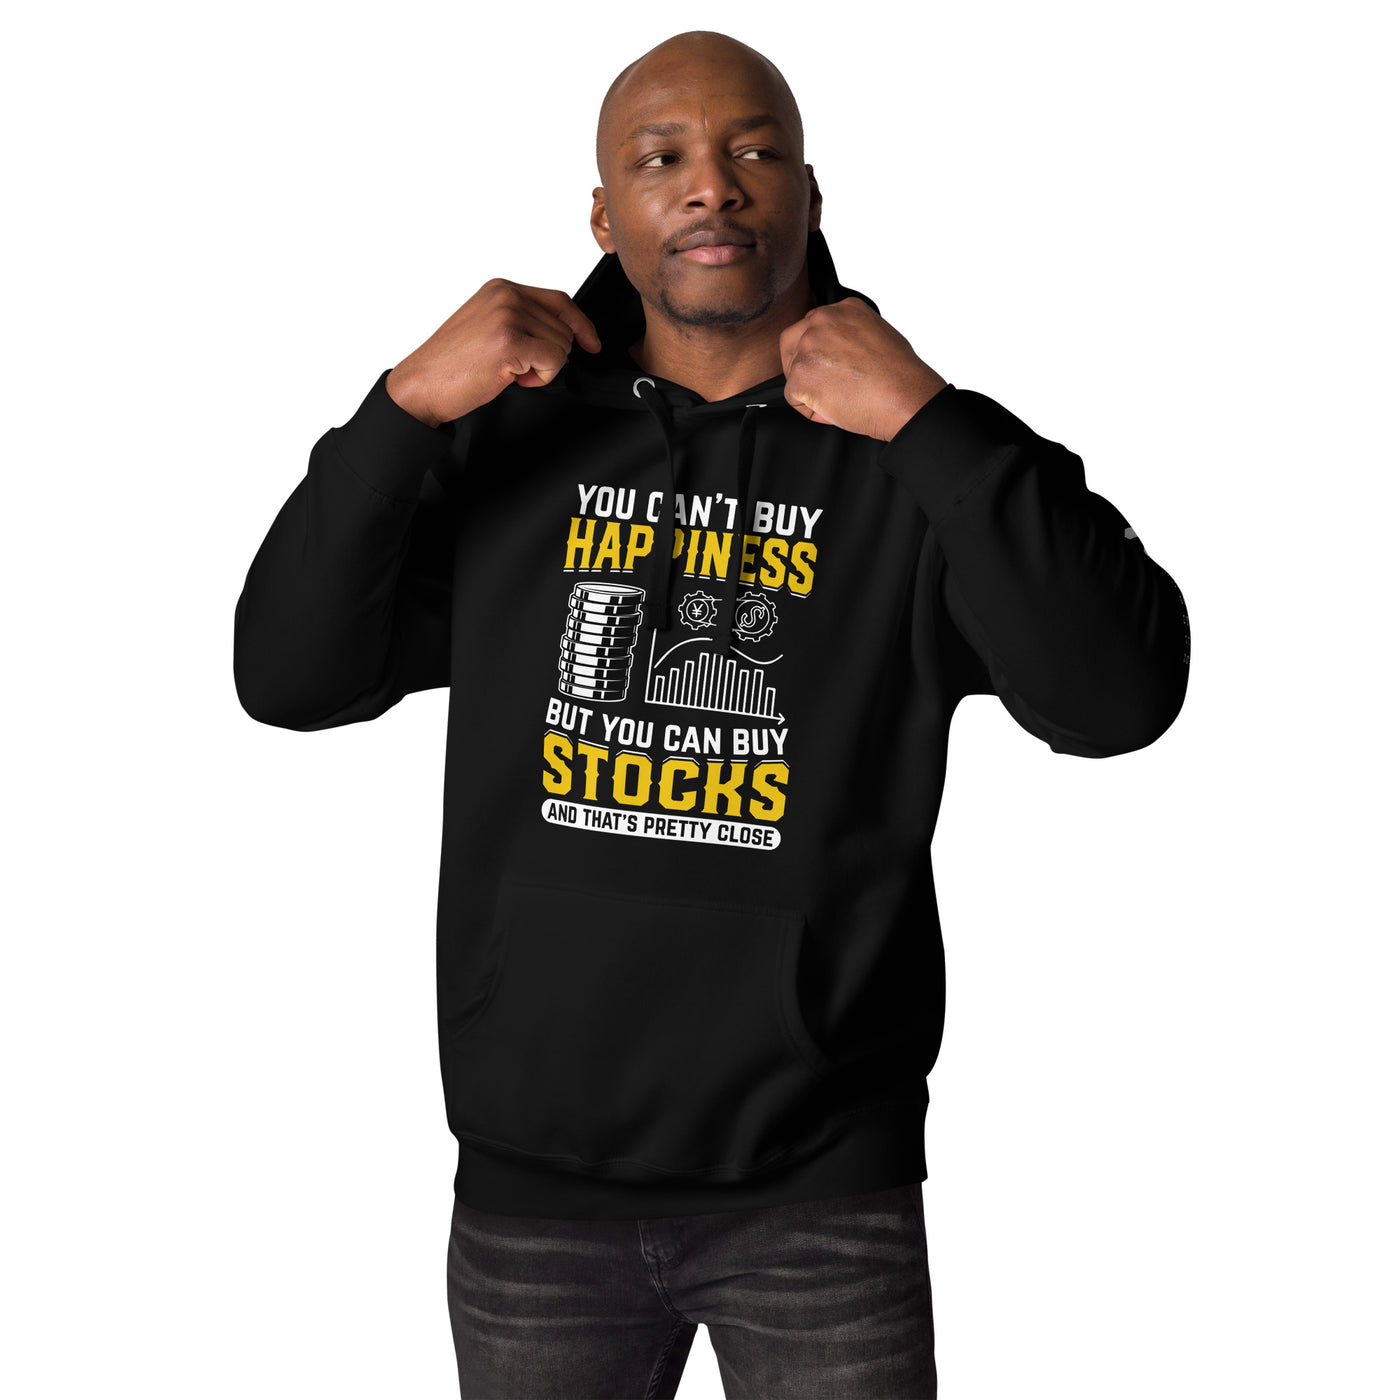 Money can't Buy you happiness but it can Buy you Stock and that was close - Unisex Hoodie